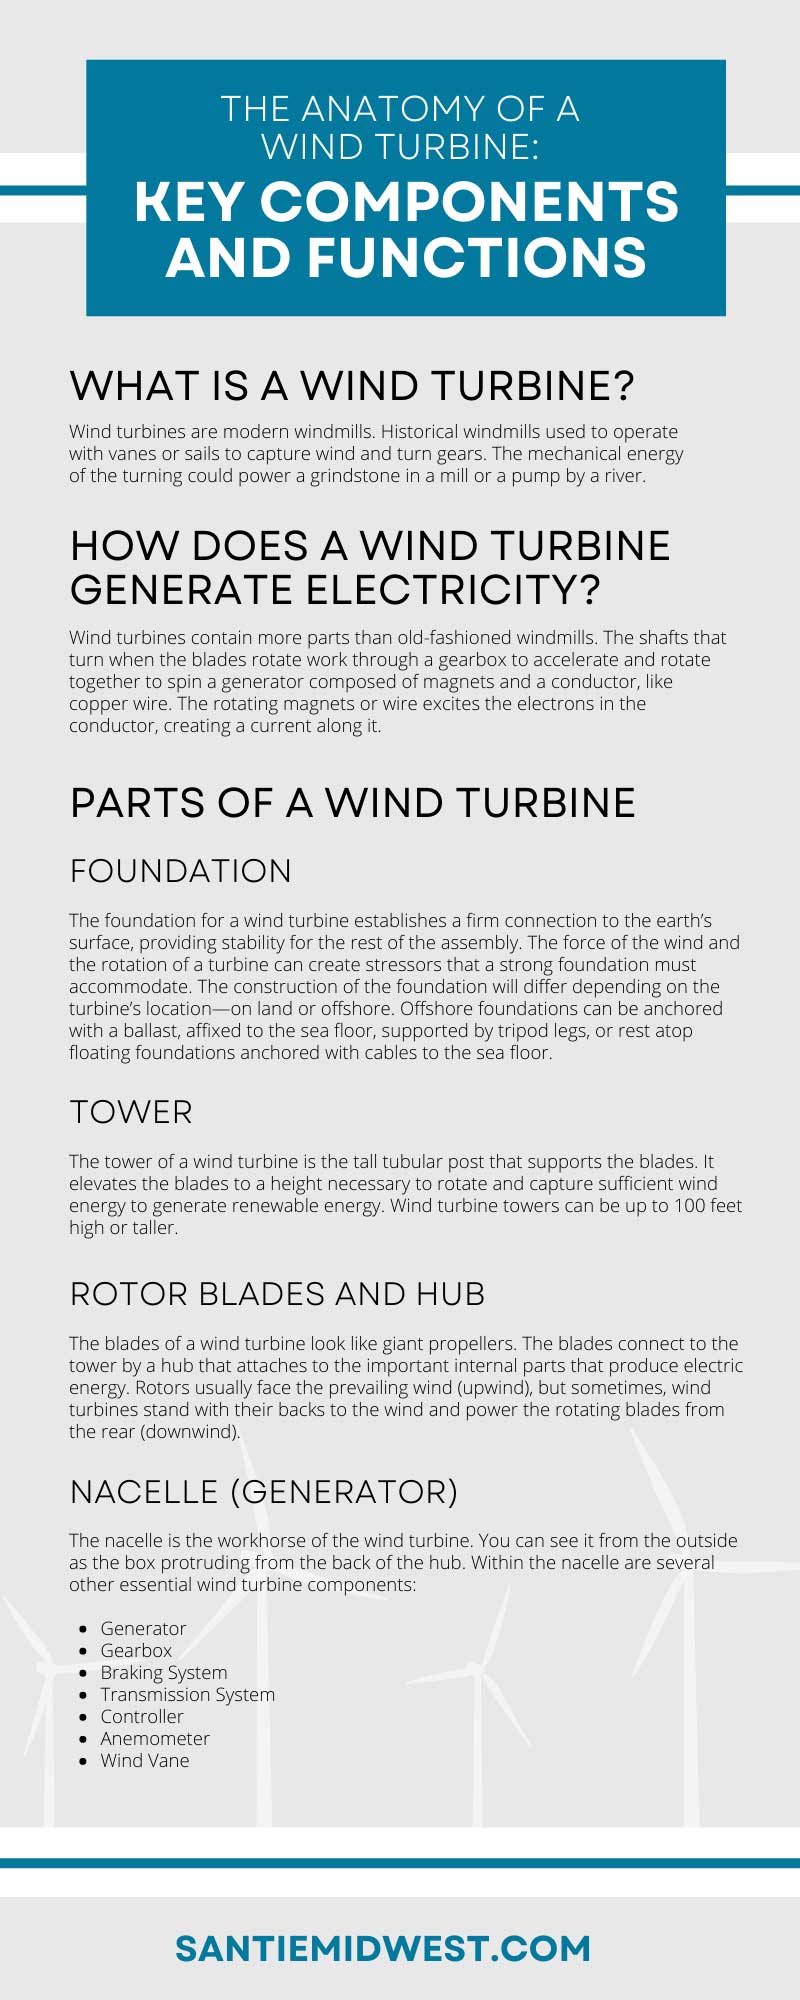 The Anatomy of a Wind Turbine: Key Components and Functions